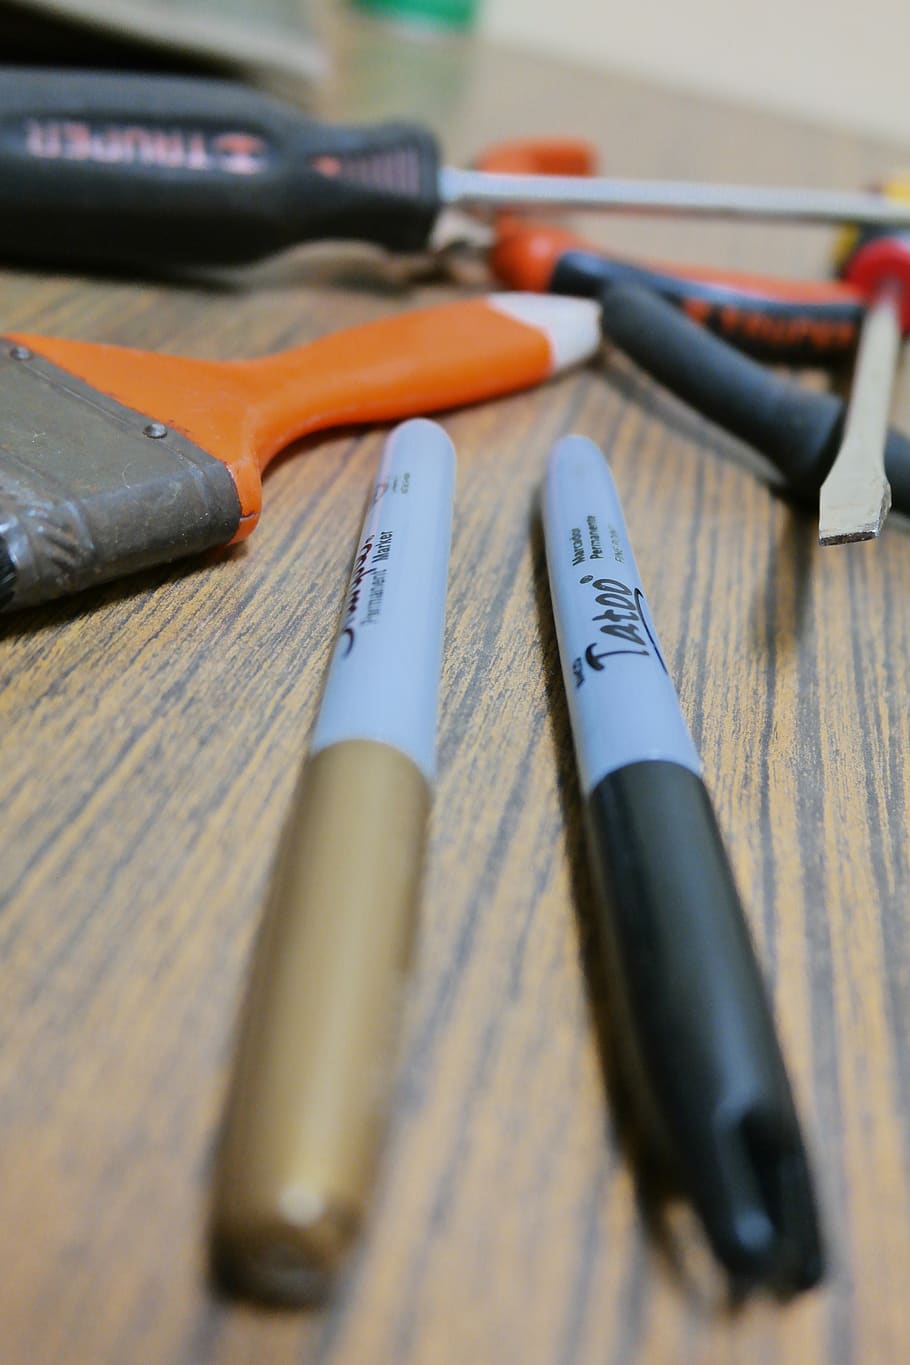 tweezers, screwdriver, brush, tools, cable ties, close-up, table, art and craft, selective focus, indoors